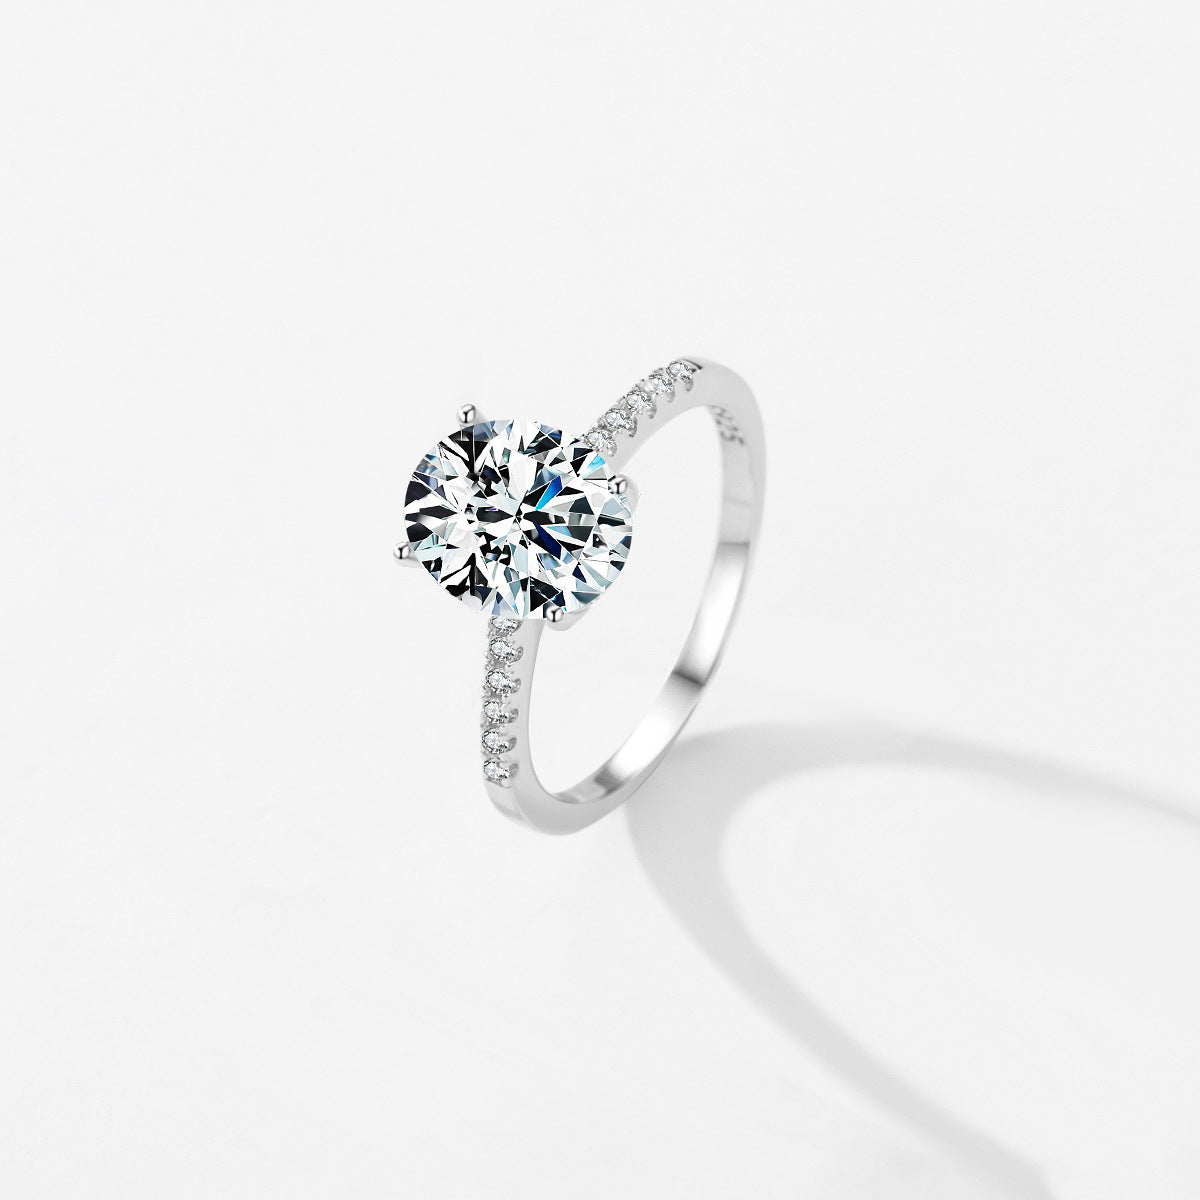 Sterling Silver Zircon Ring: Chic and Elegant Luxury Accessory